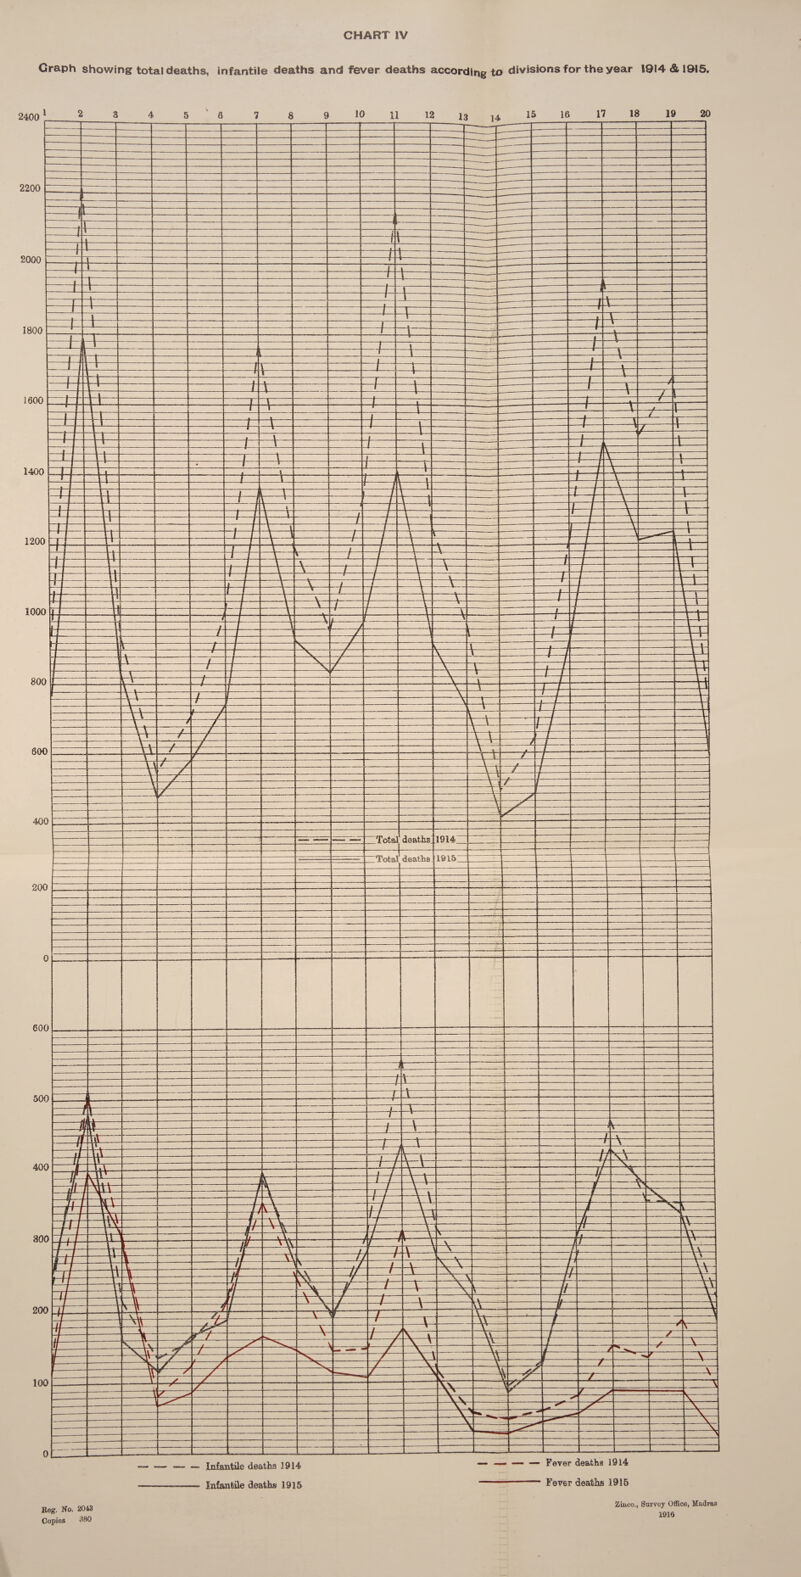 Graph showing total deaths, infantile deaths and fever deaths according to divisions for the year 1914 & 1915. Keg. No. 2043 Copies 380 Ziuco., Survey Office, Madras 1916